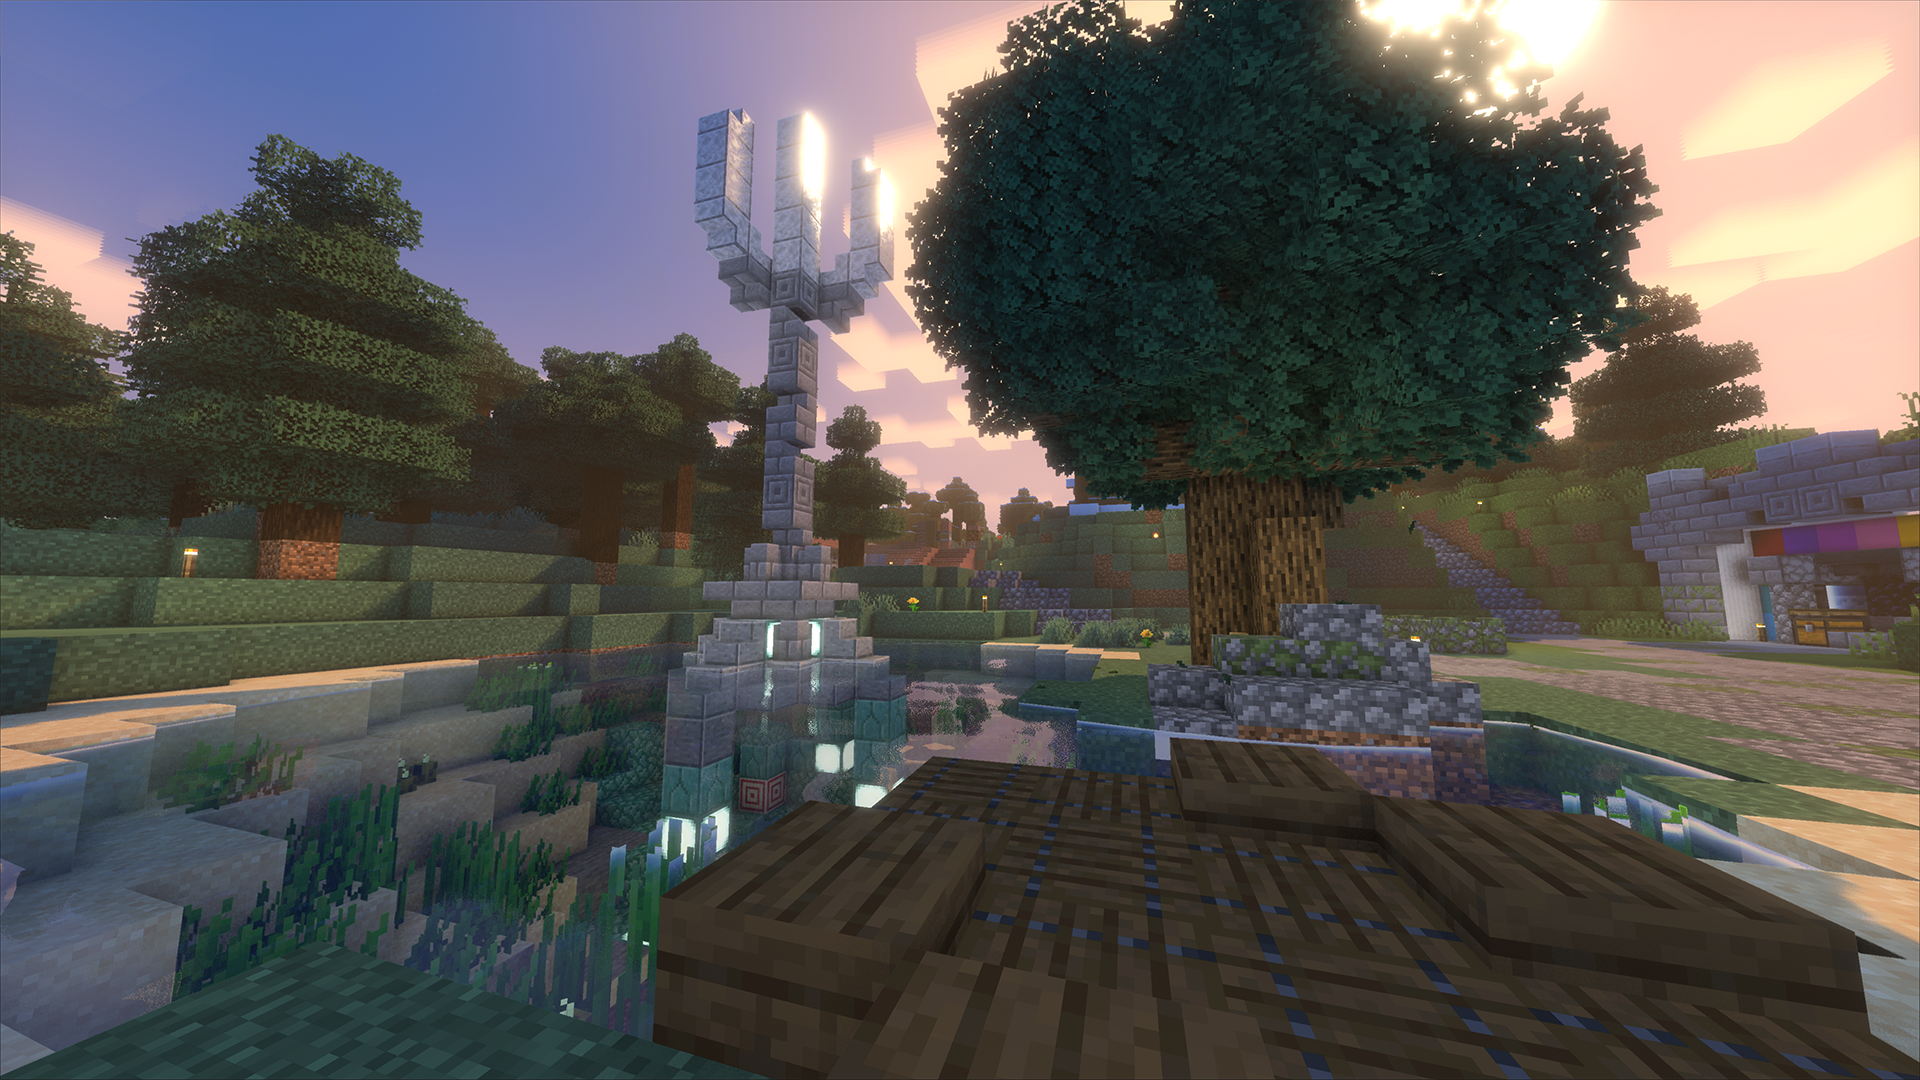 A lake with a giant trident seen with shaders